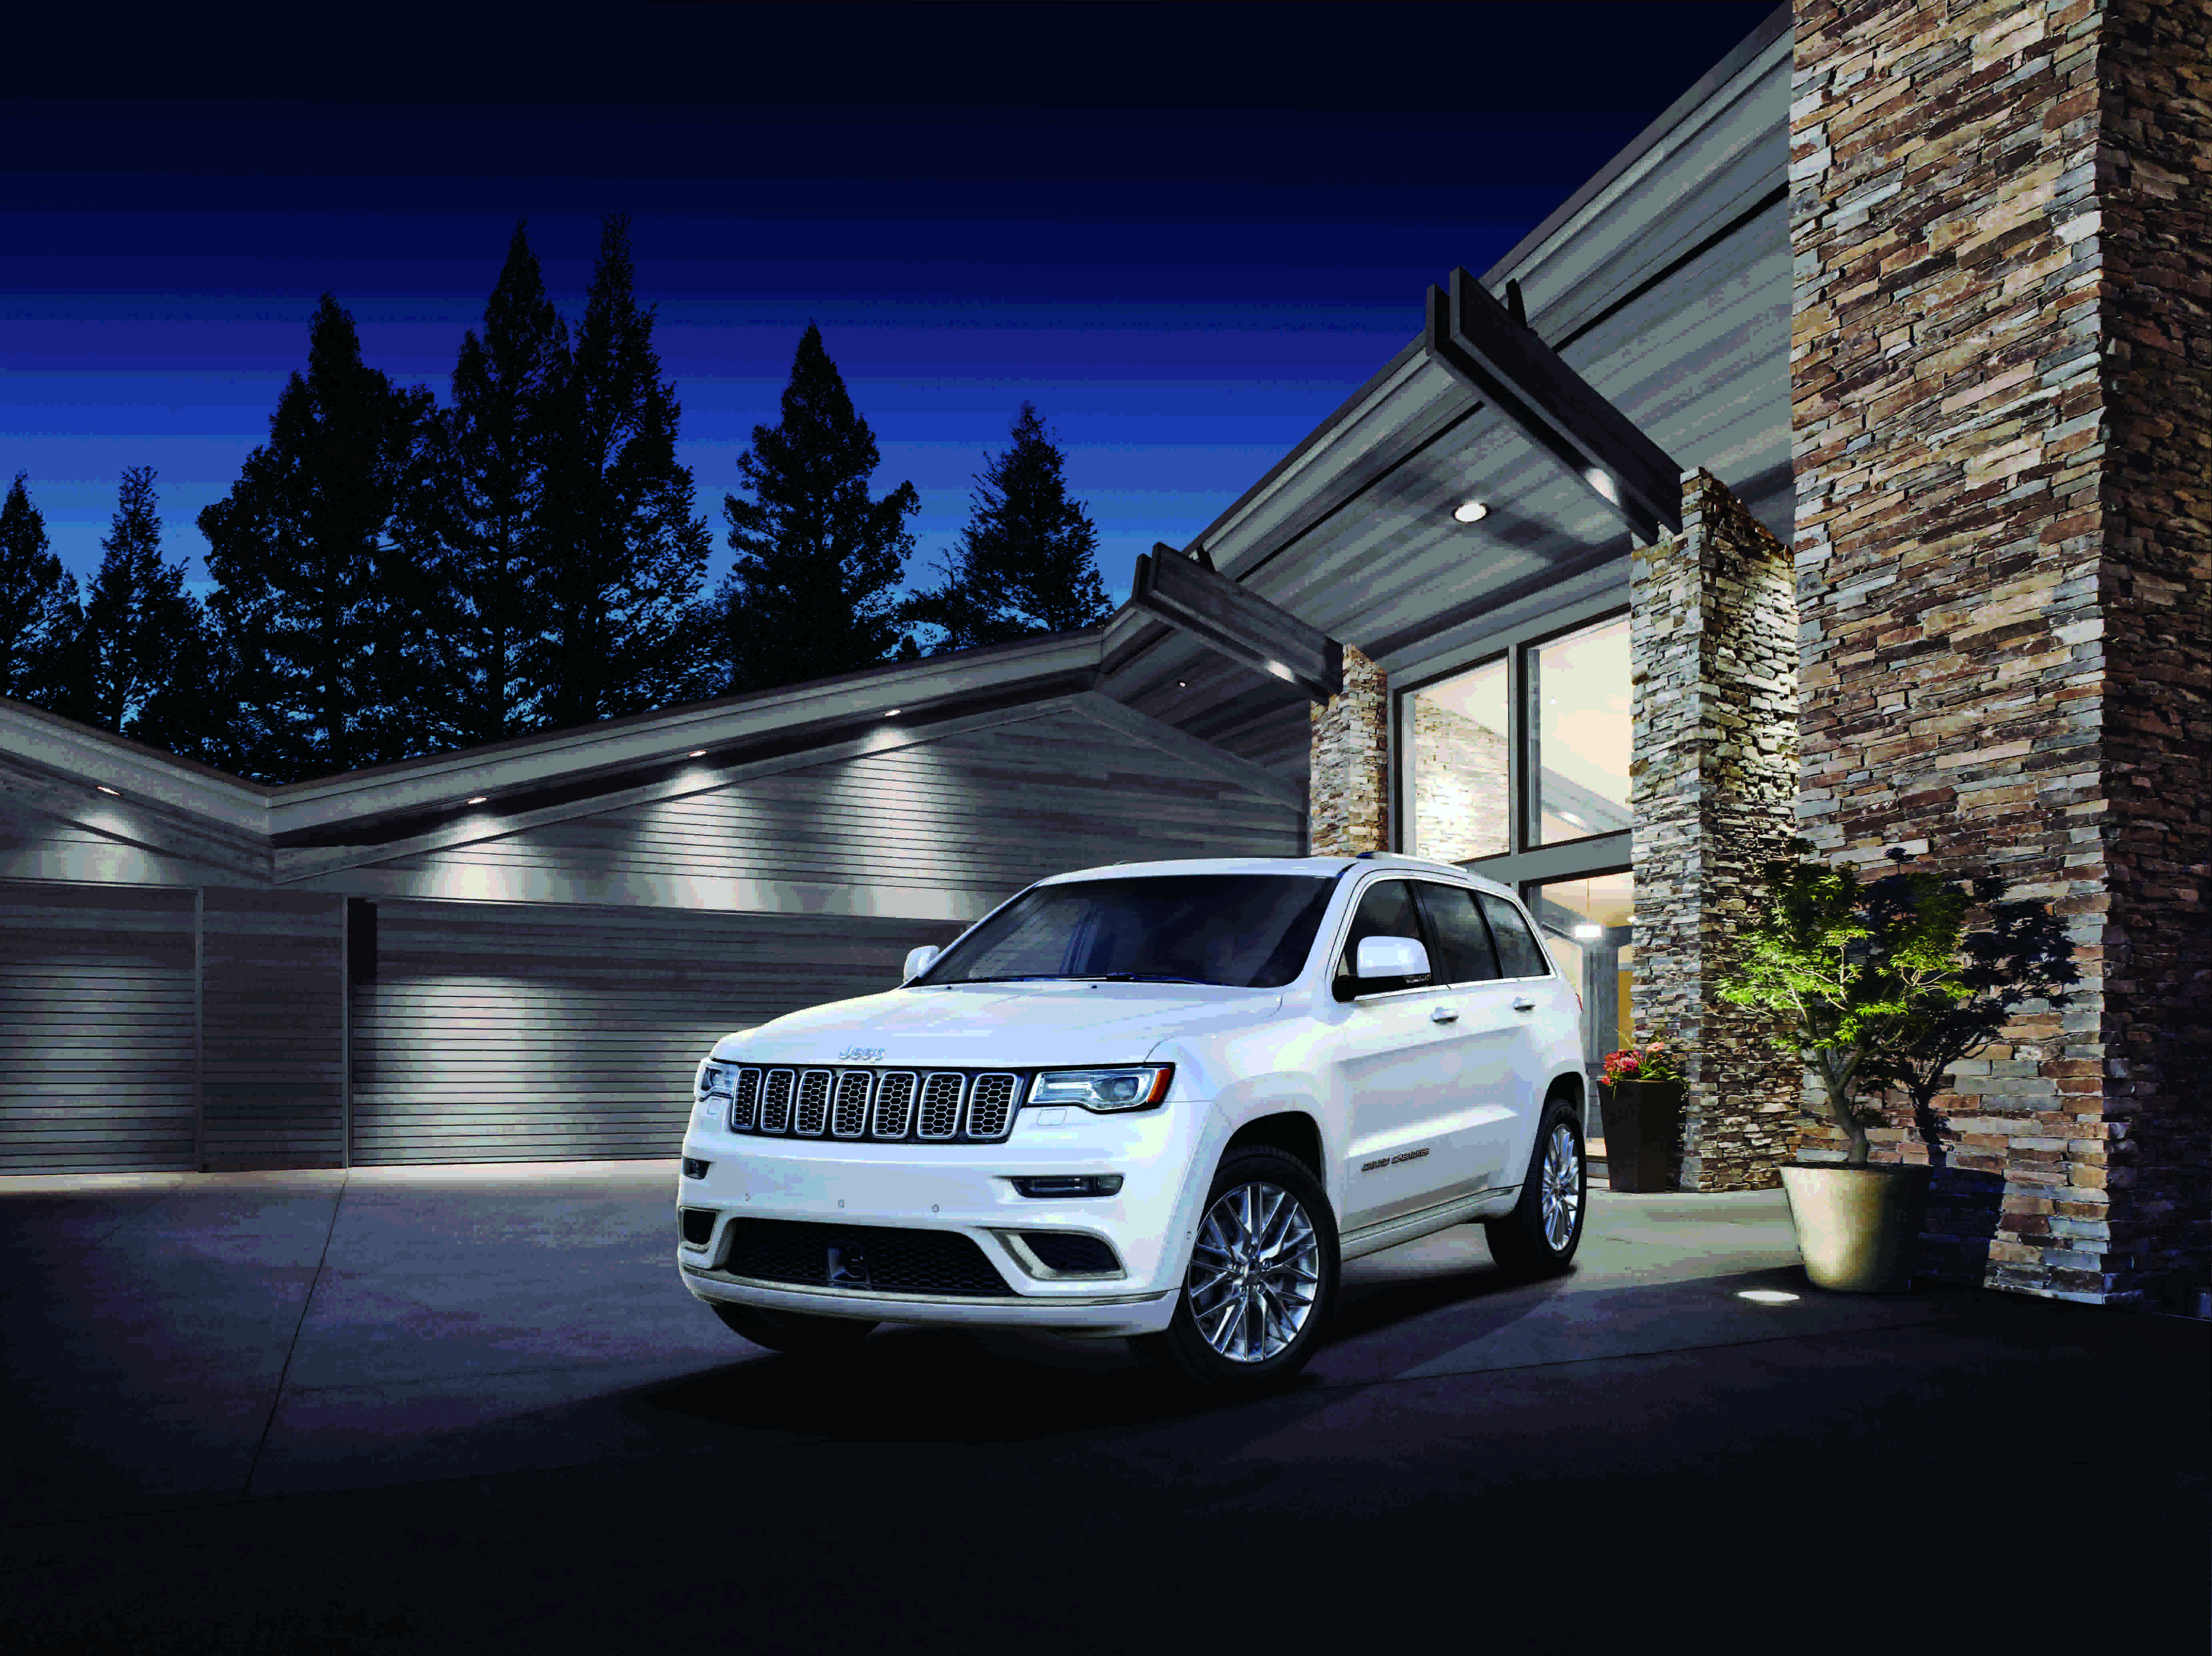 Jeep Grand Cherokee Fans Have Plenty to Be Excited About